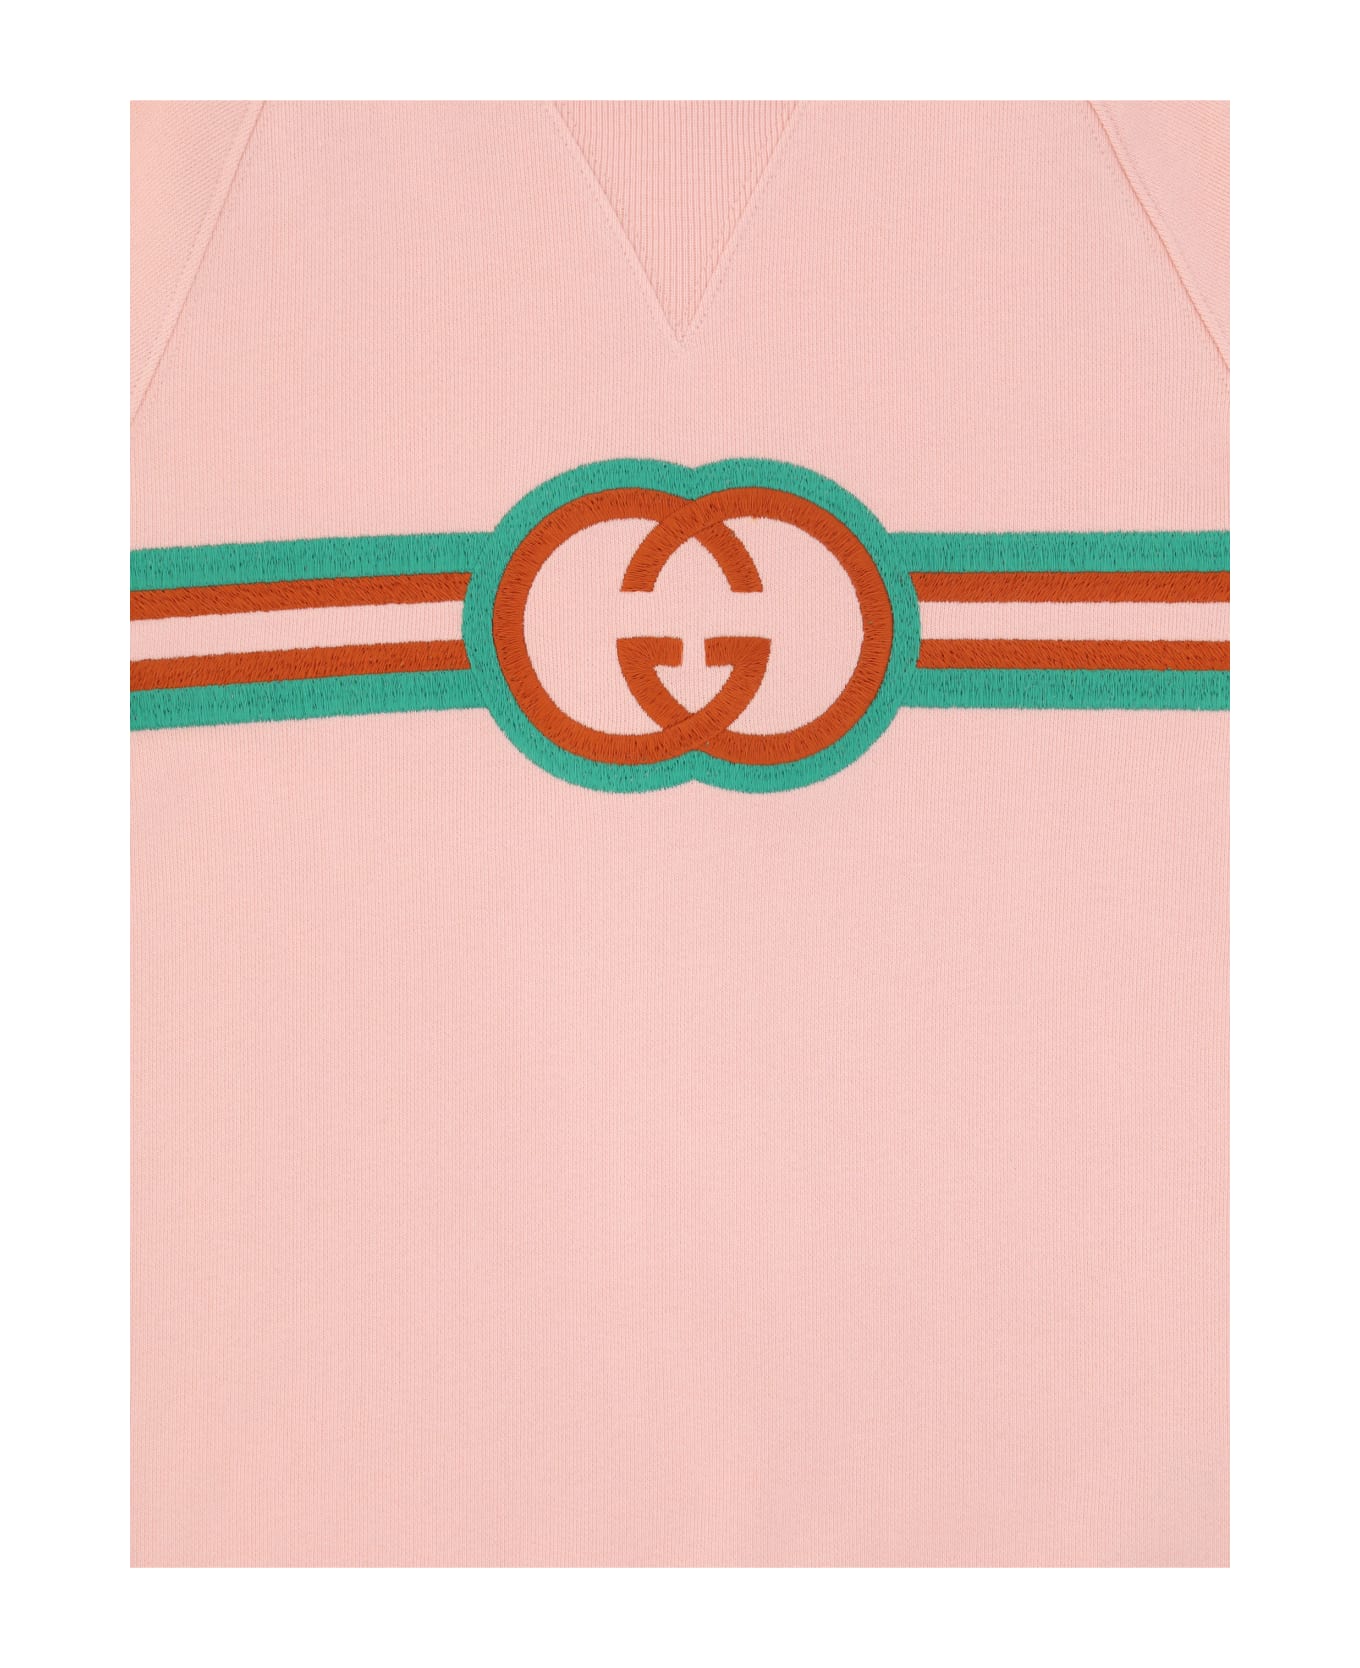 Gucci Dress For Girl - Rosa